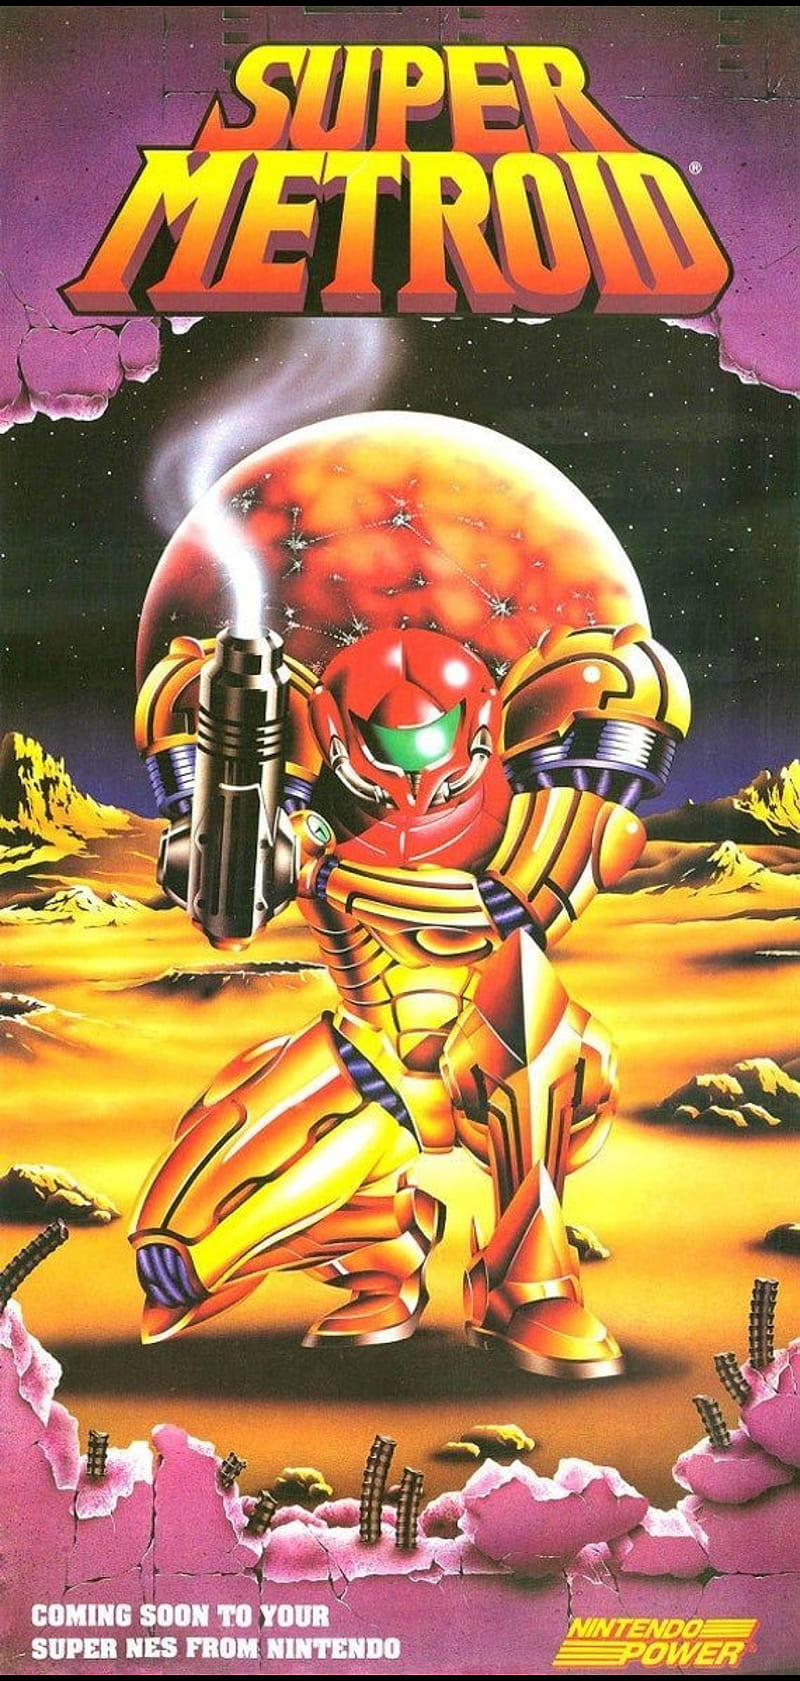 Random Nintendo Shares Gorgeous Metroid Art Thats Just Perfect For Your Phone  Wallpaper 